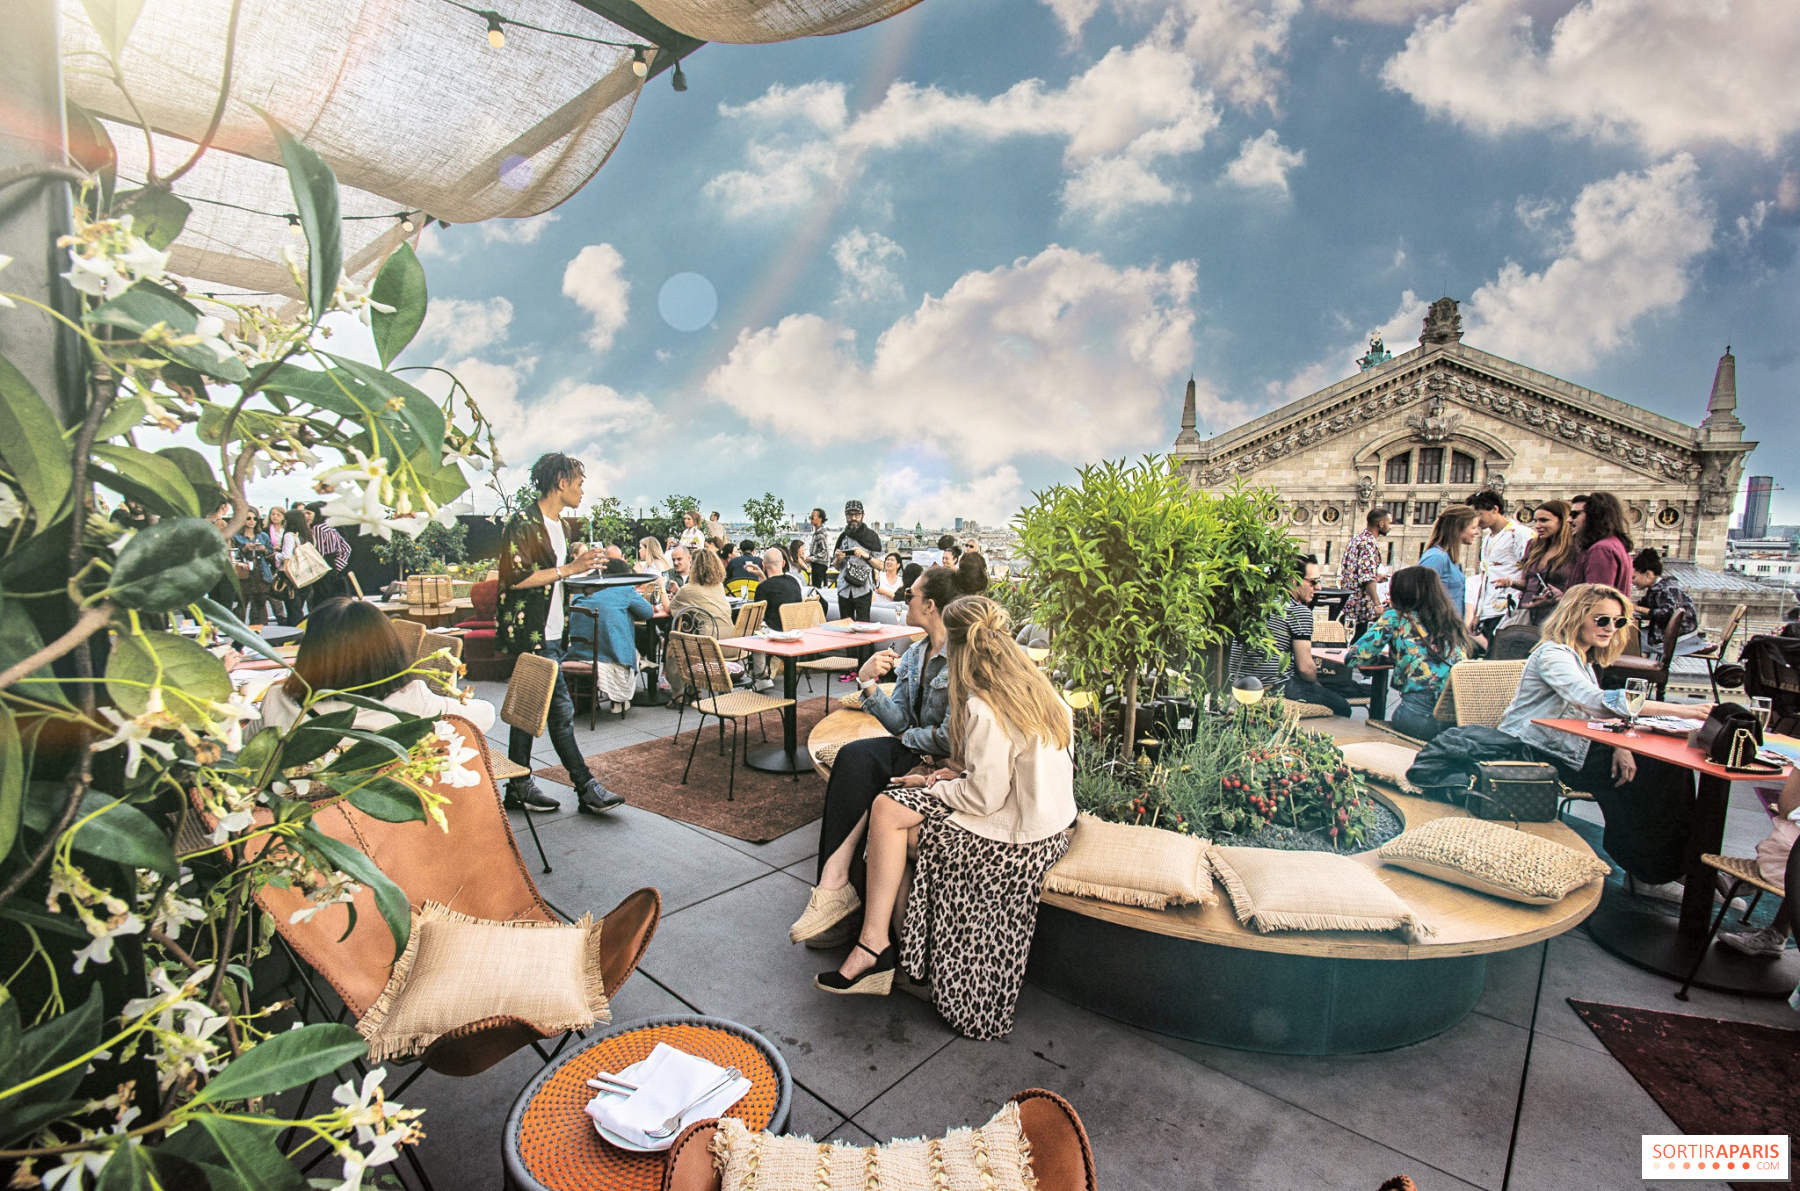 Galeries Lafayette - It's time for a rooftop dinner at Galeries